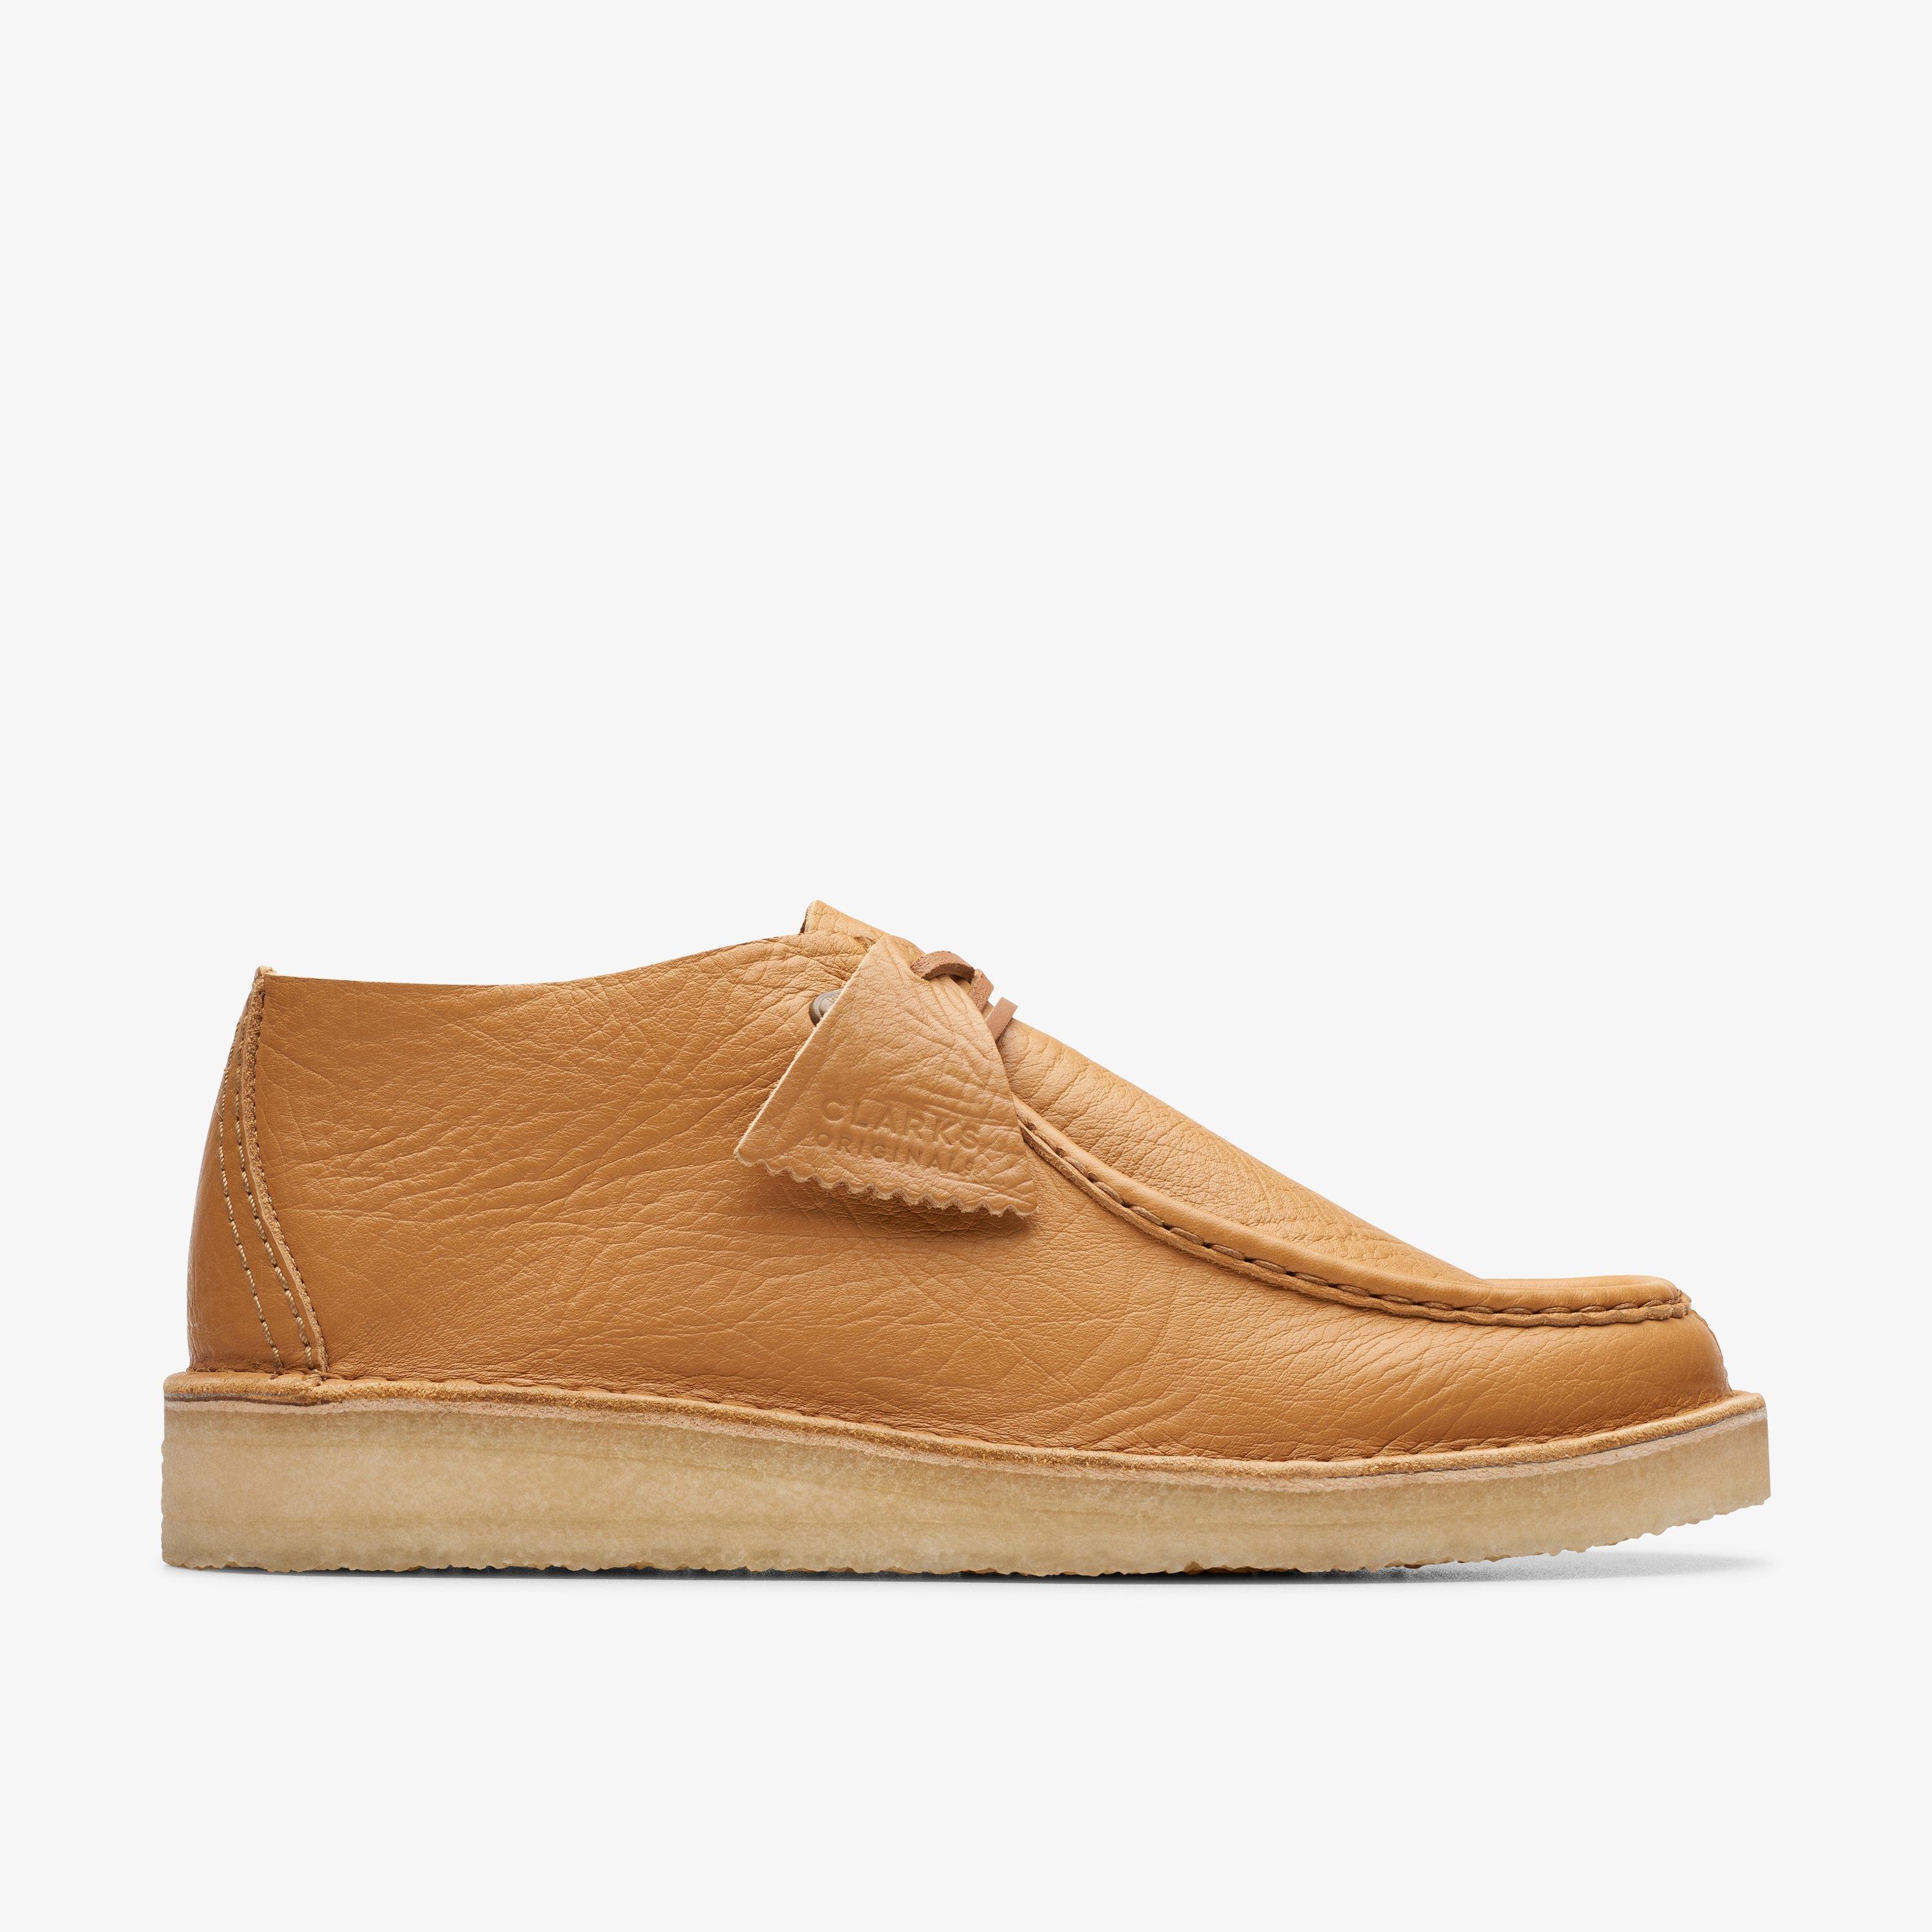 MENS Desert Nomad Curry Leather Desert Boots | Clarks US